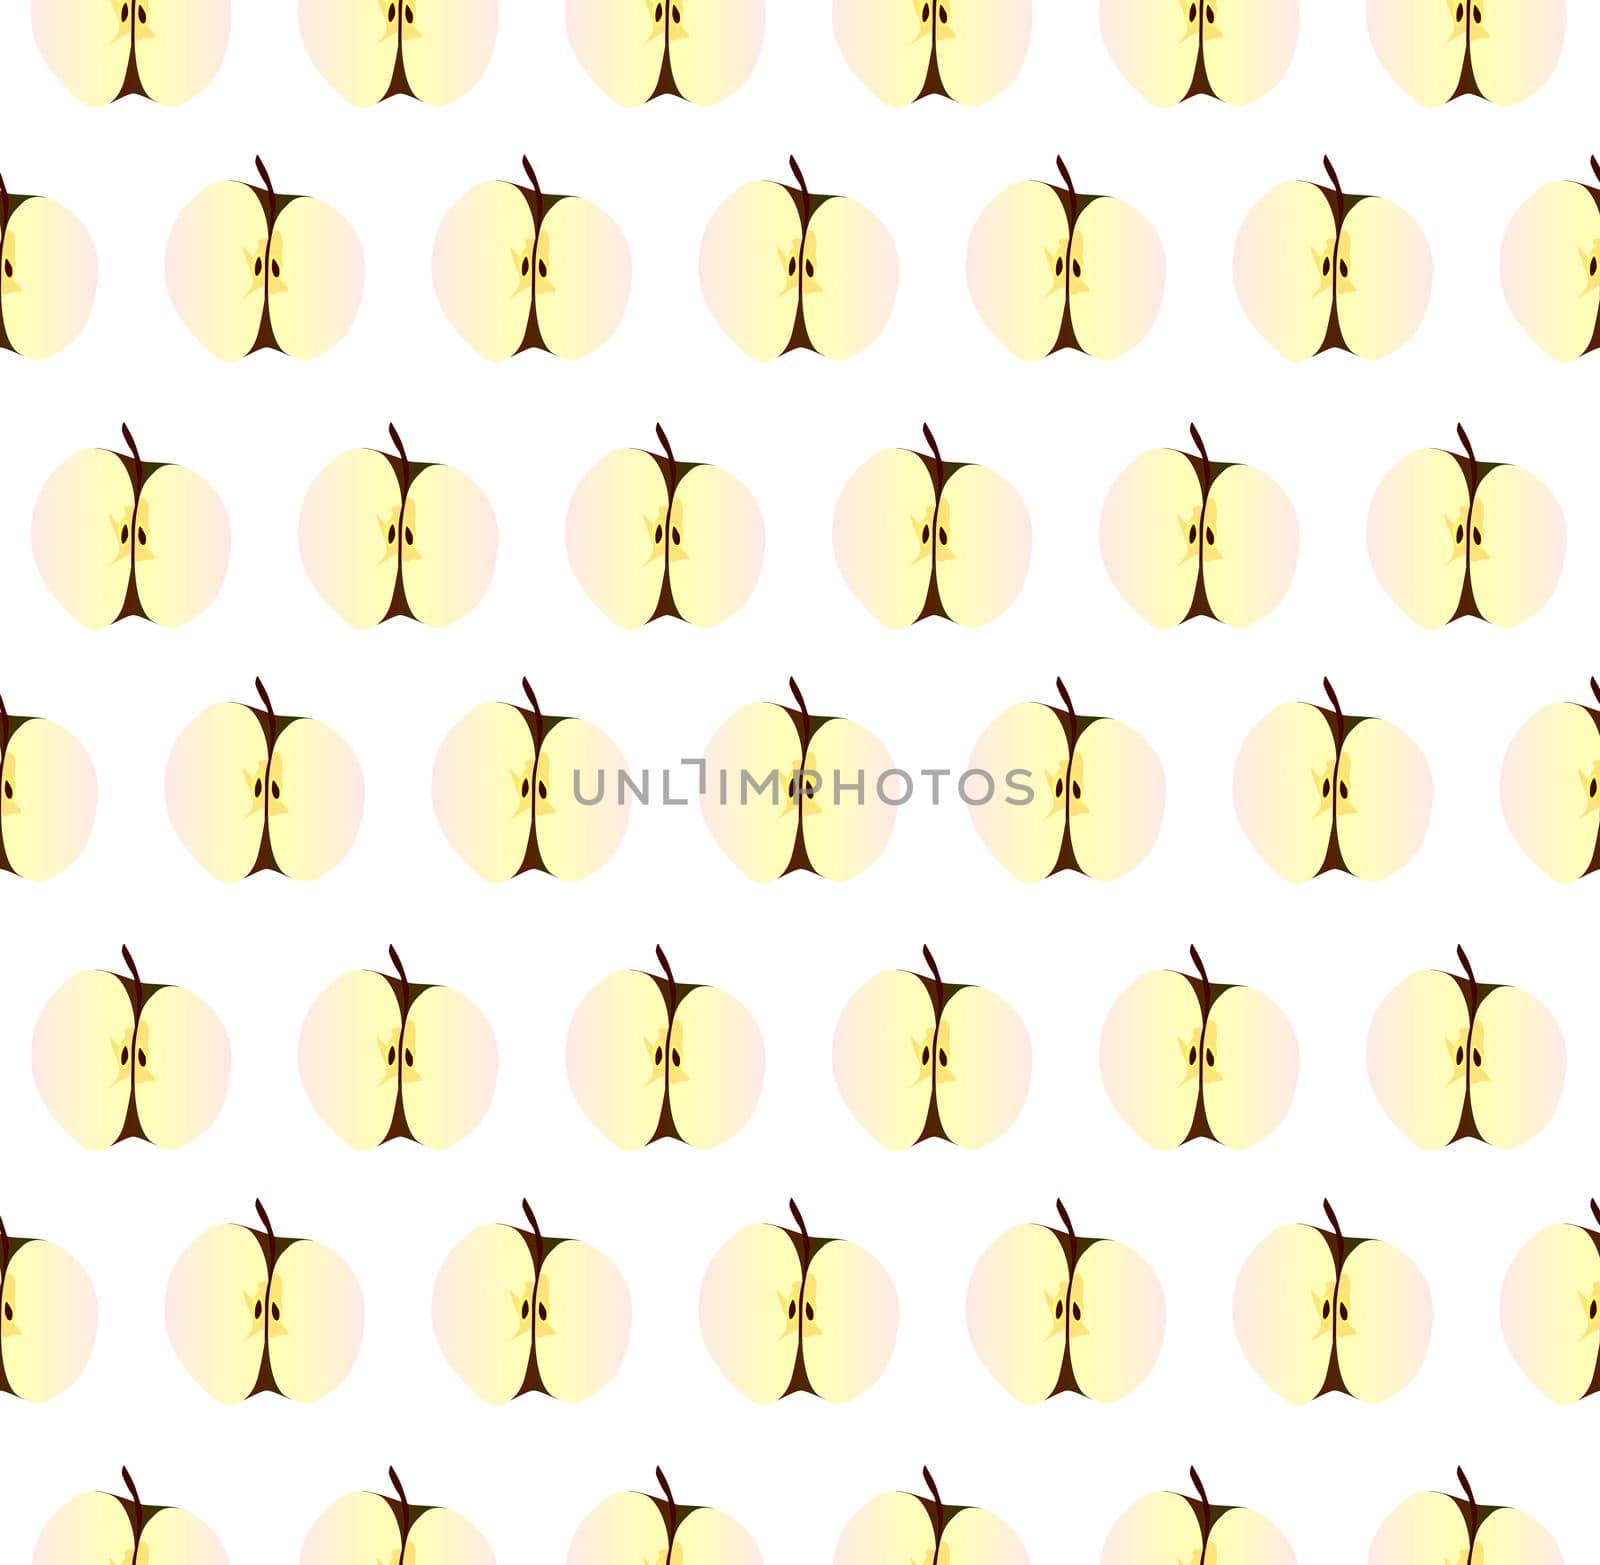 Several half apples set in rows as a background over white and seamless